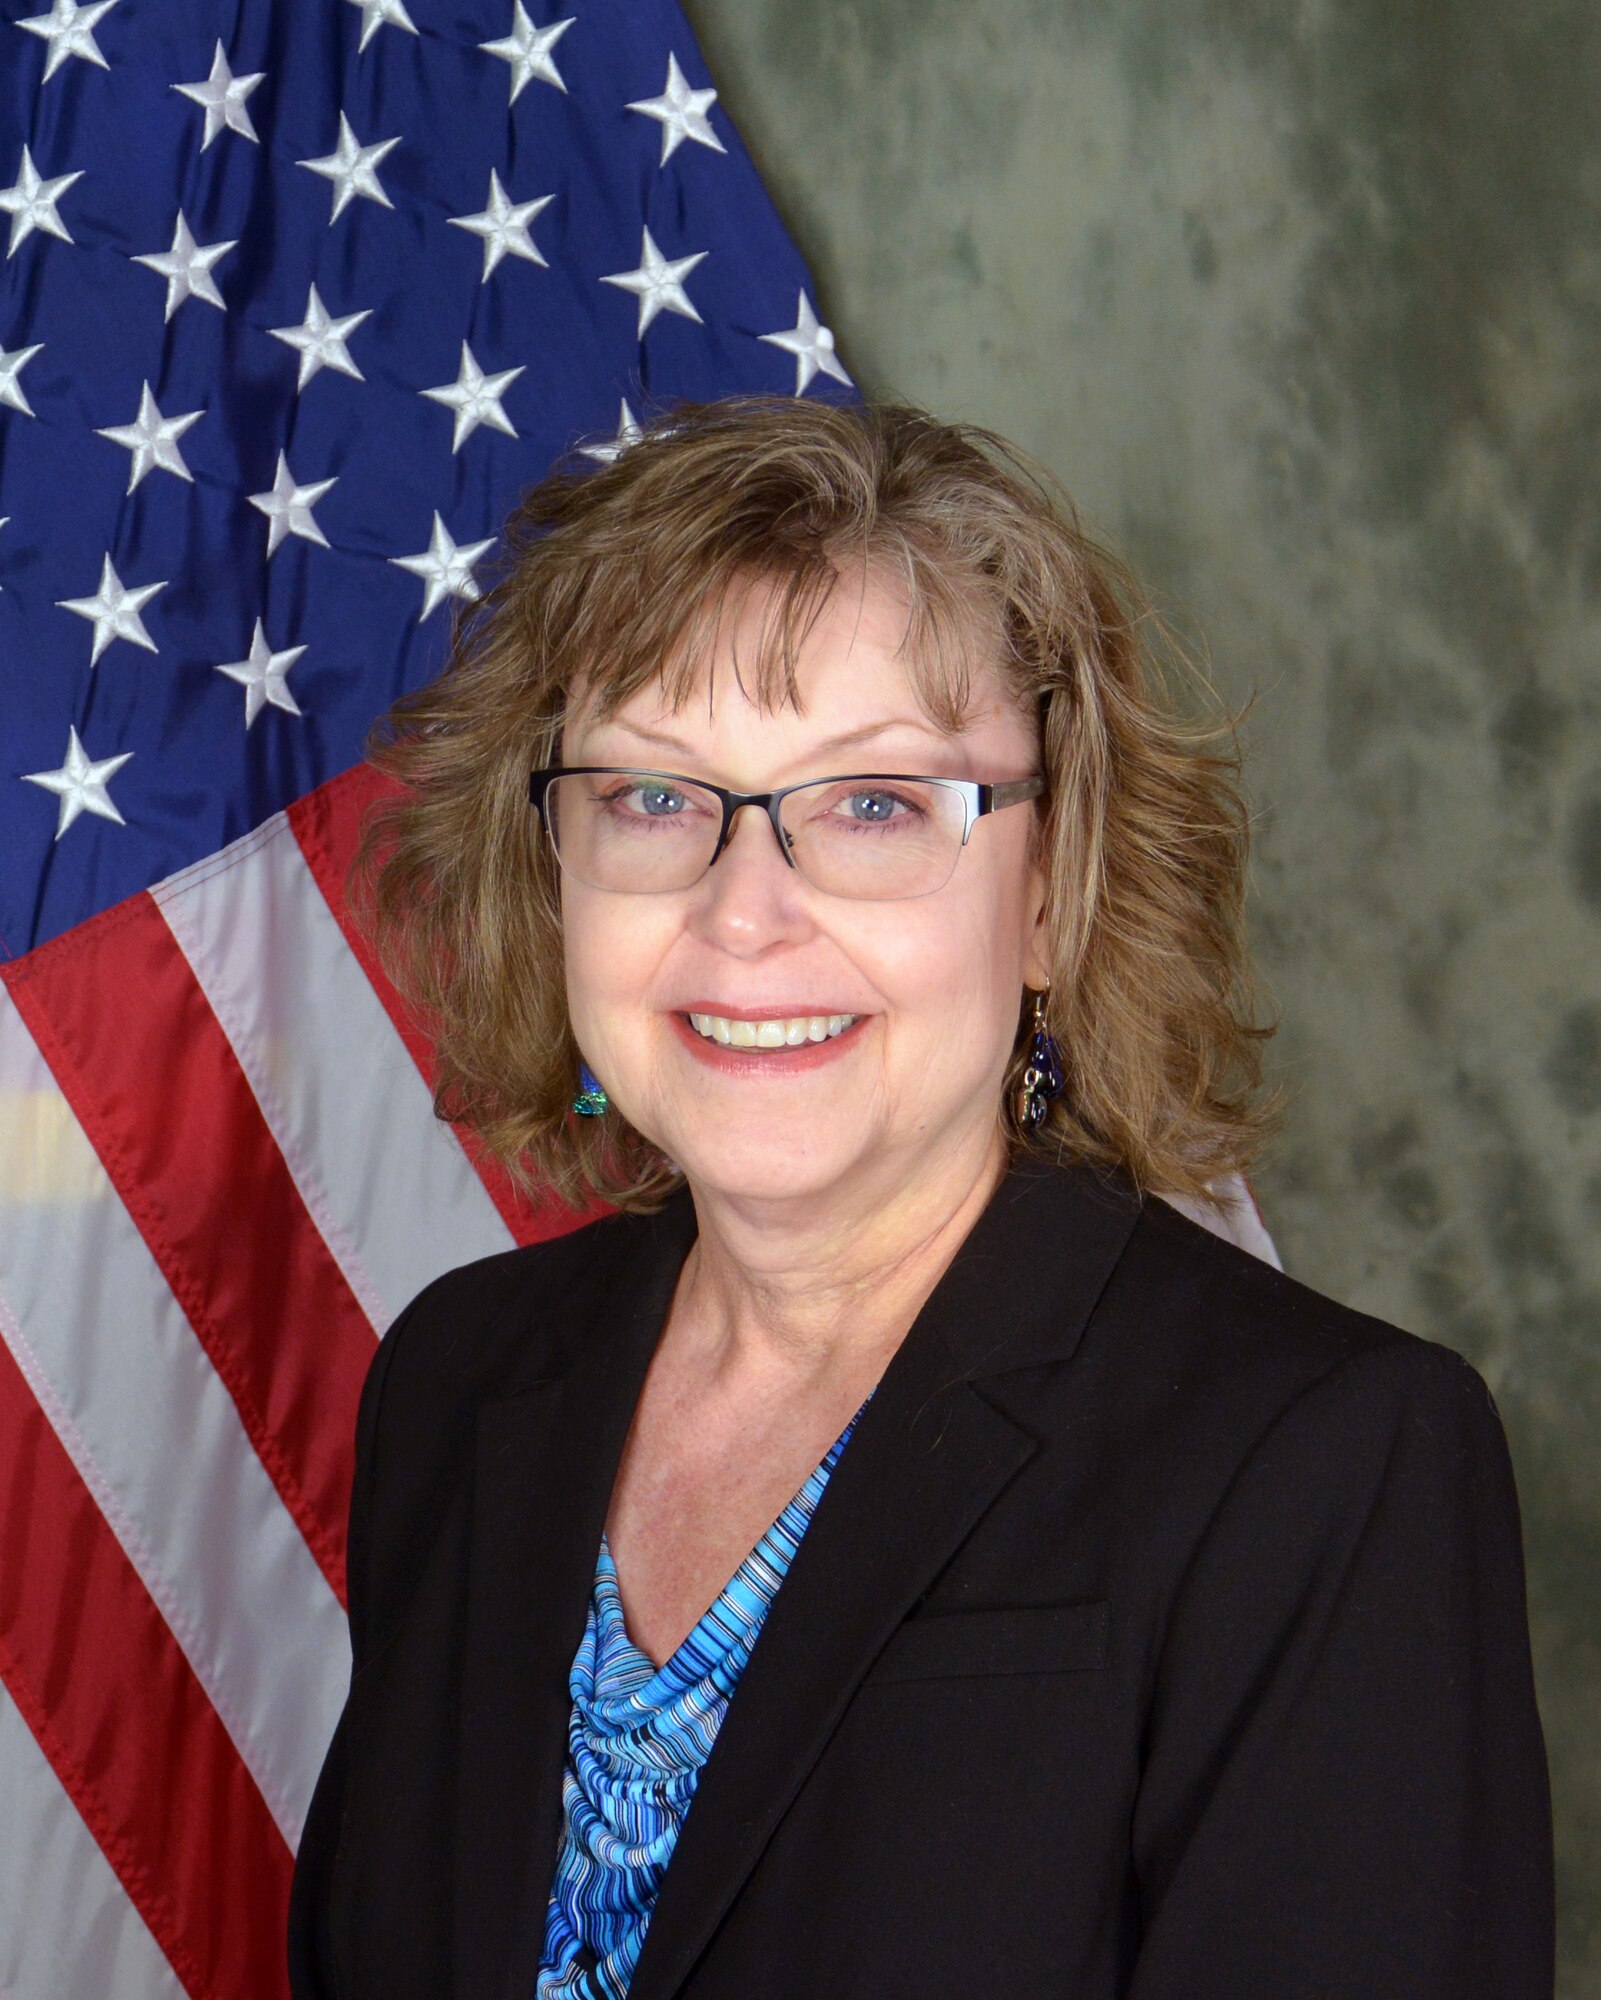 Dr. Katie Thorp worked for the Air Force for 26 years, most recently serving as a research leader at the Air Force Research Laboratory Materials & Manufacturing Directorate, Wright-Patterson Air Force Base, Ohio. (Courtesy photo)